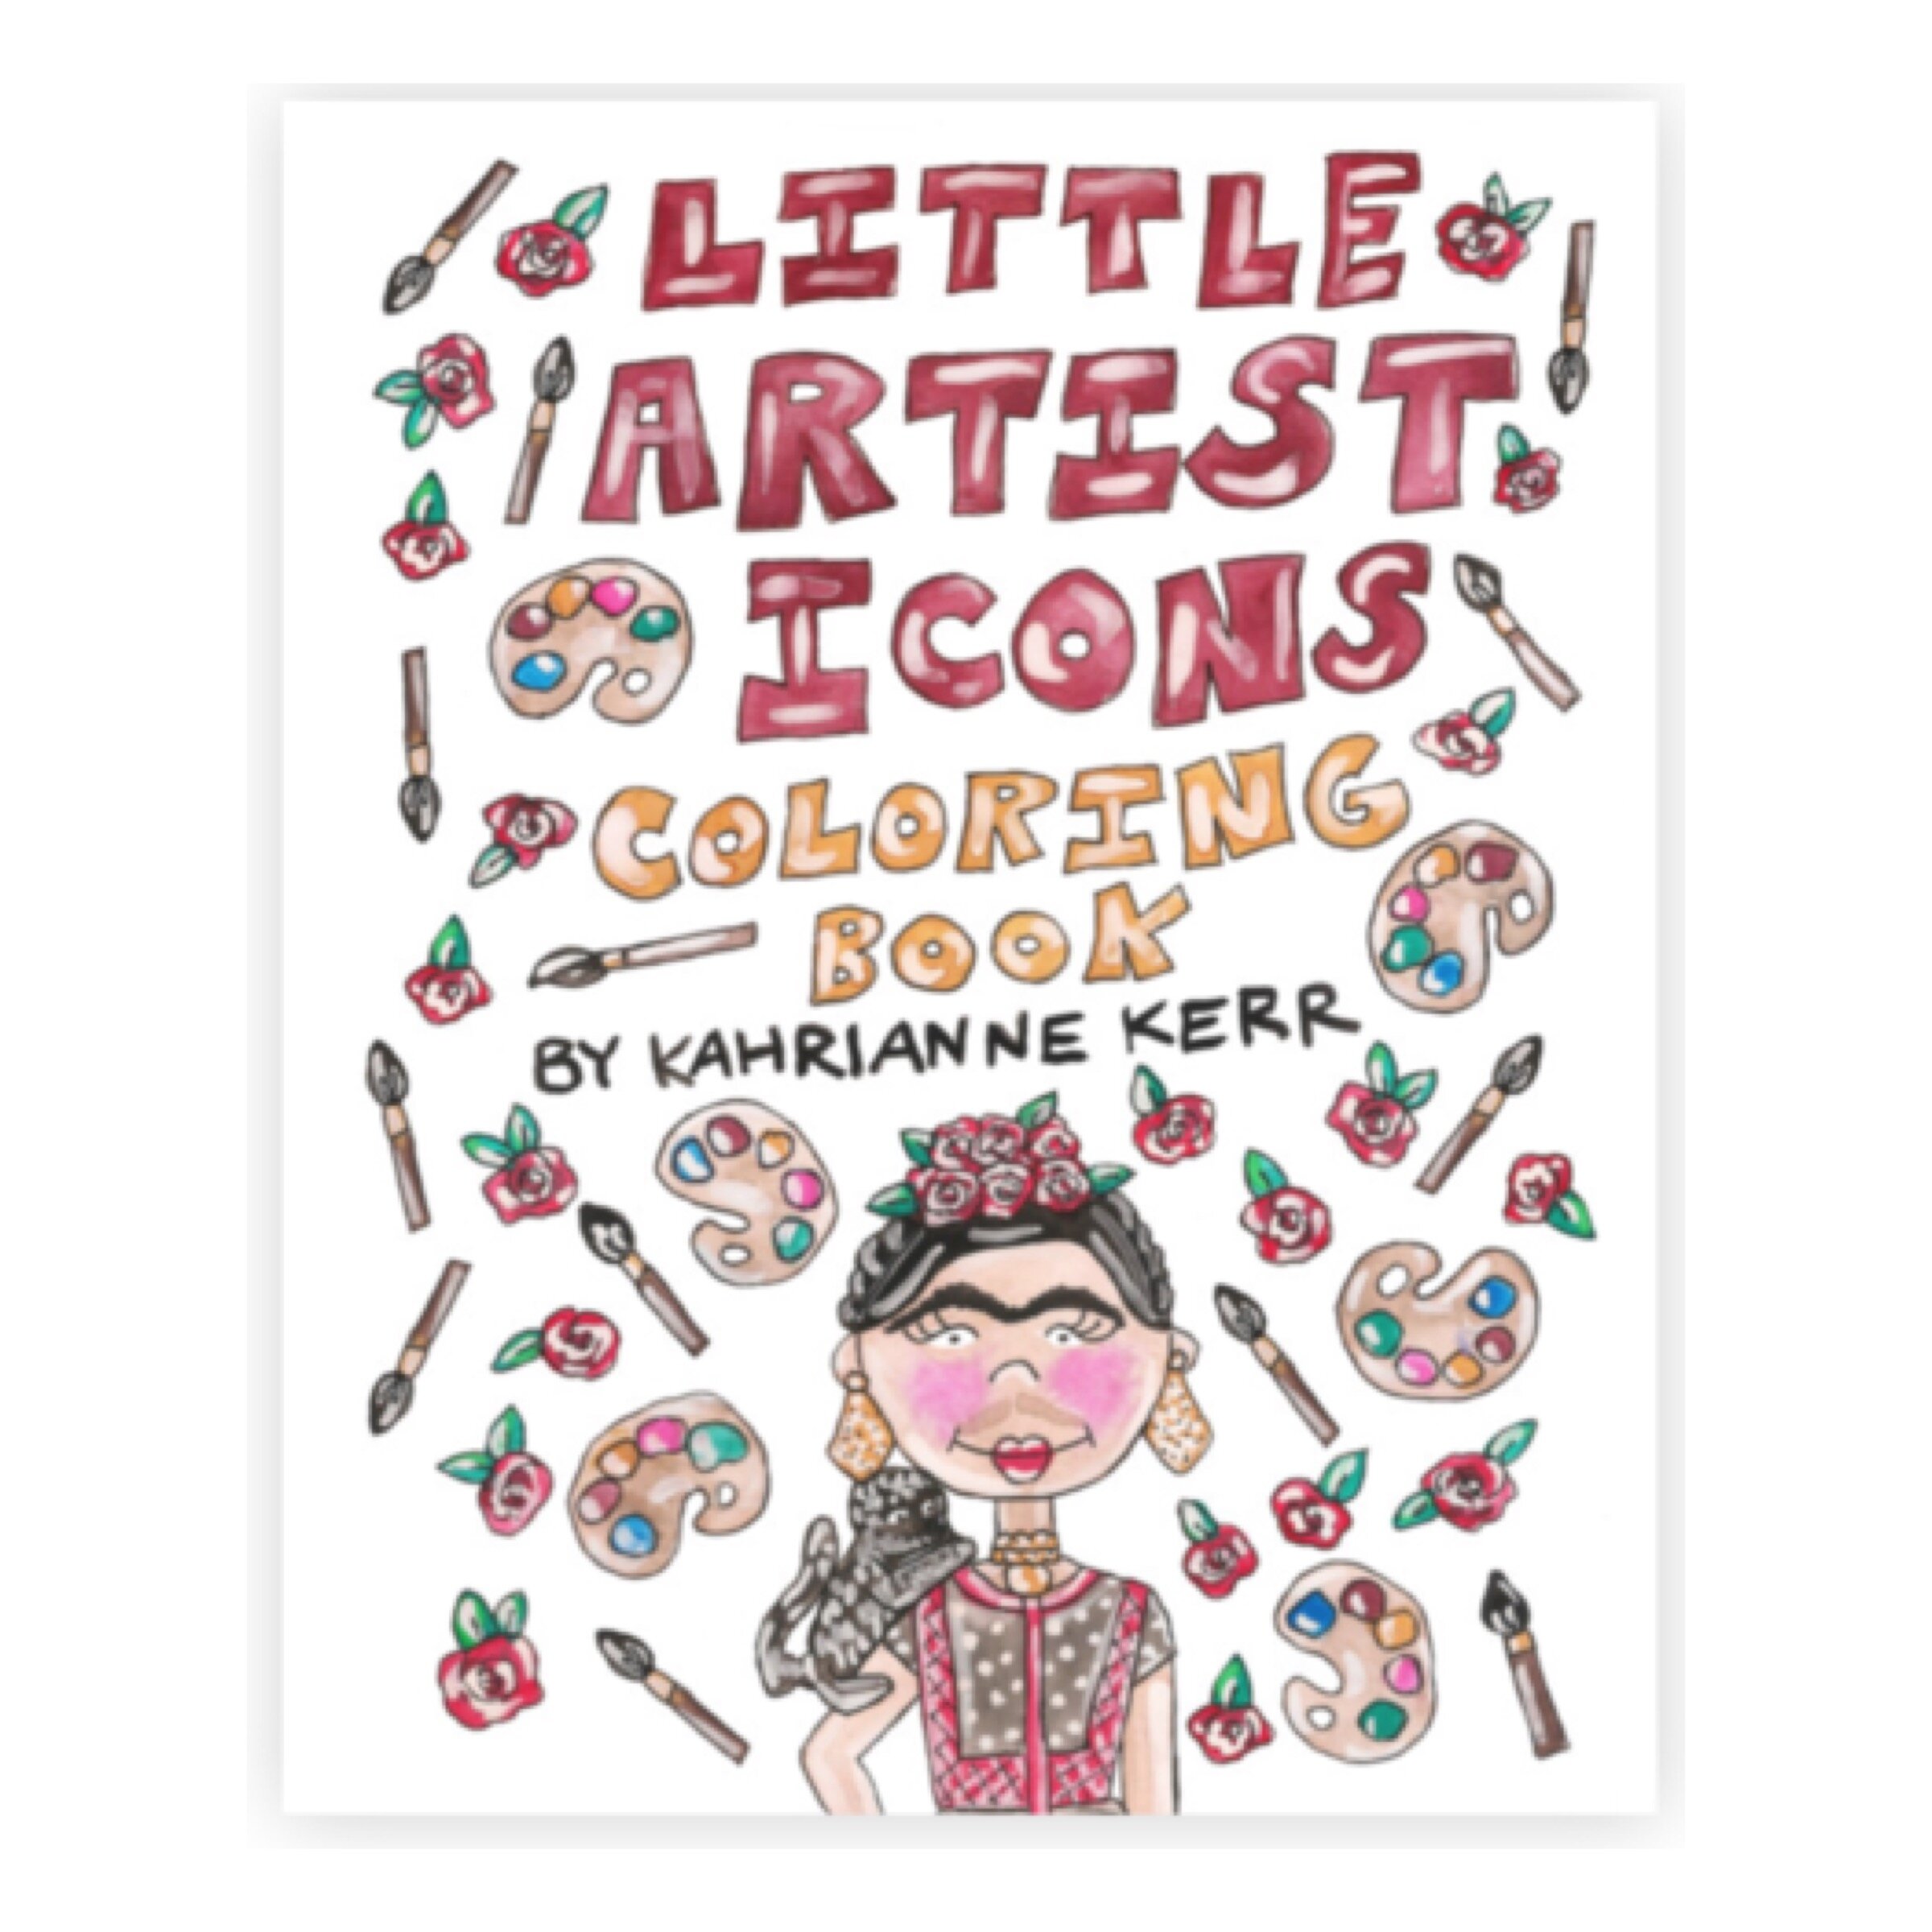 $19.99 LITTLE ARTIST ICONS COLORING BOOK